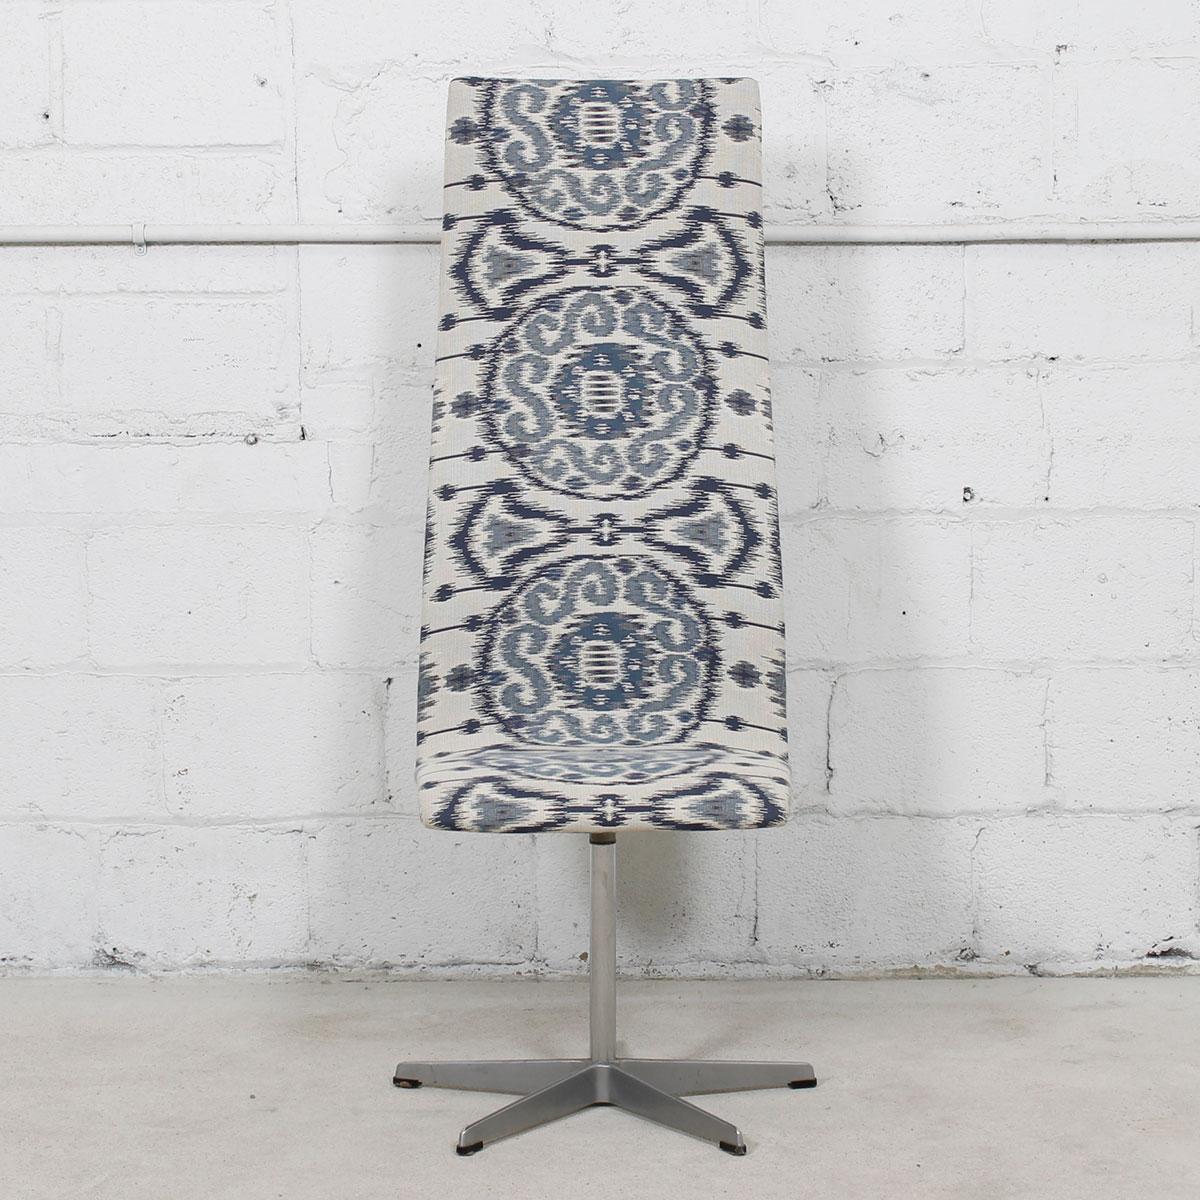 Danish Set of 6 Vintage Fritz Hansen Oxford Chairs in New Blue & White Ikat Upholstery For Sale